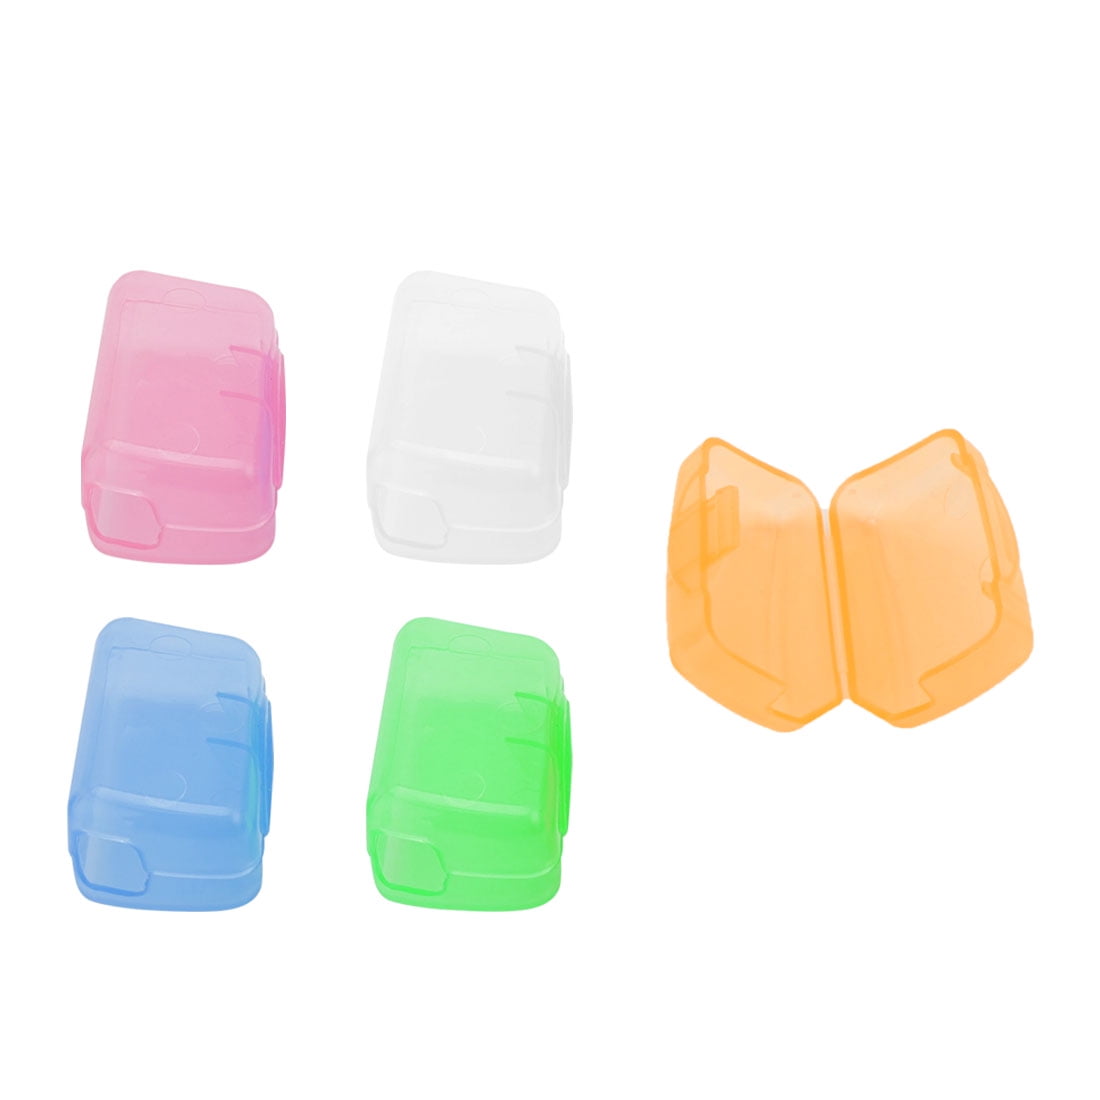 10x Toothbrush Head Cover Case Cap Travel Hike Camping Brush Cleaner Protector 